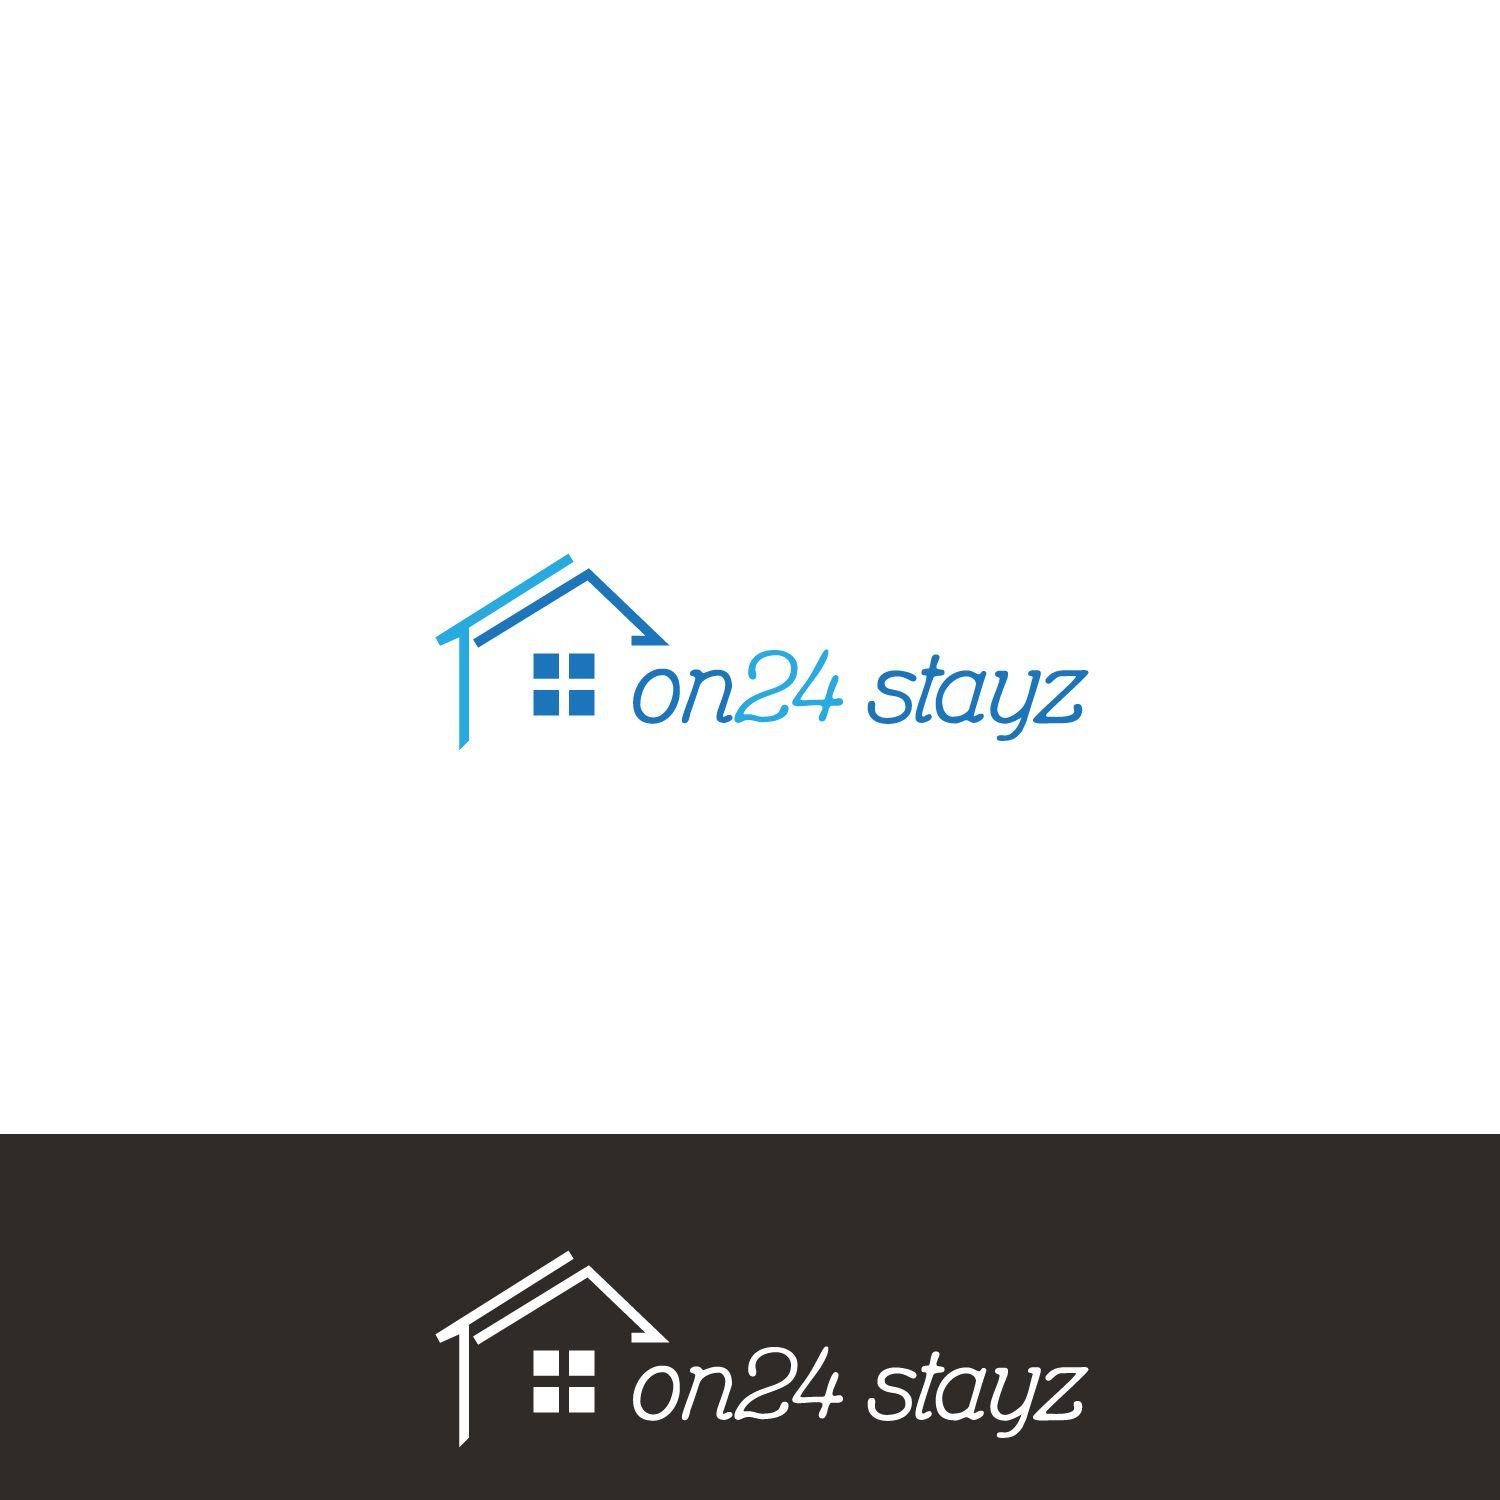 On24 Logo - Modern, Professional, Accommodation Logo Design for On24 Stayz by ...